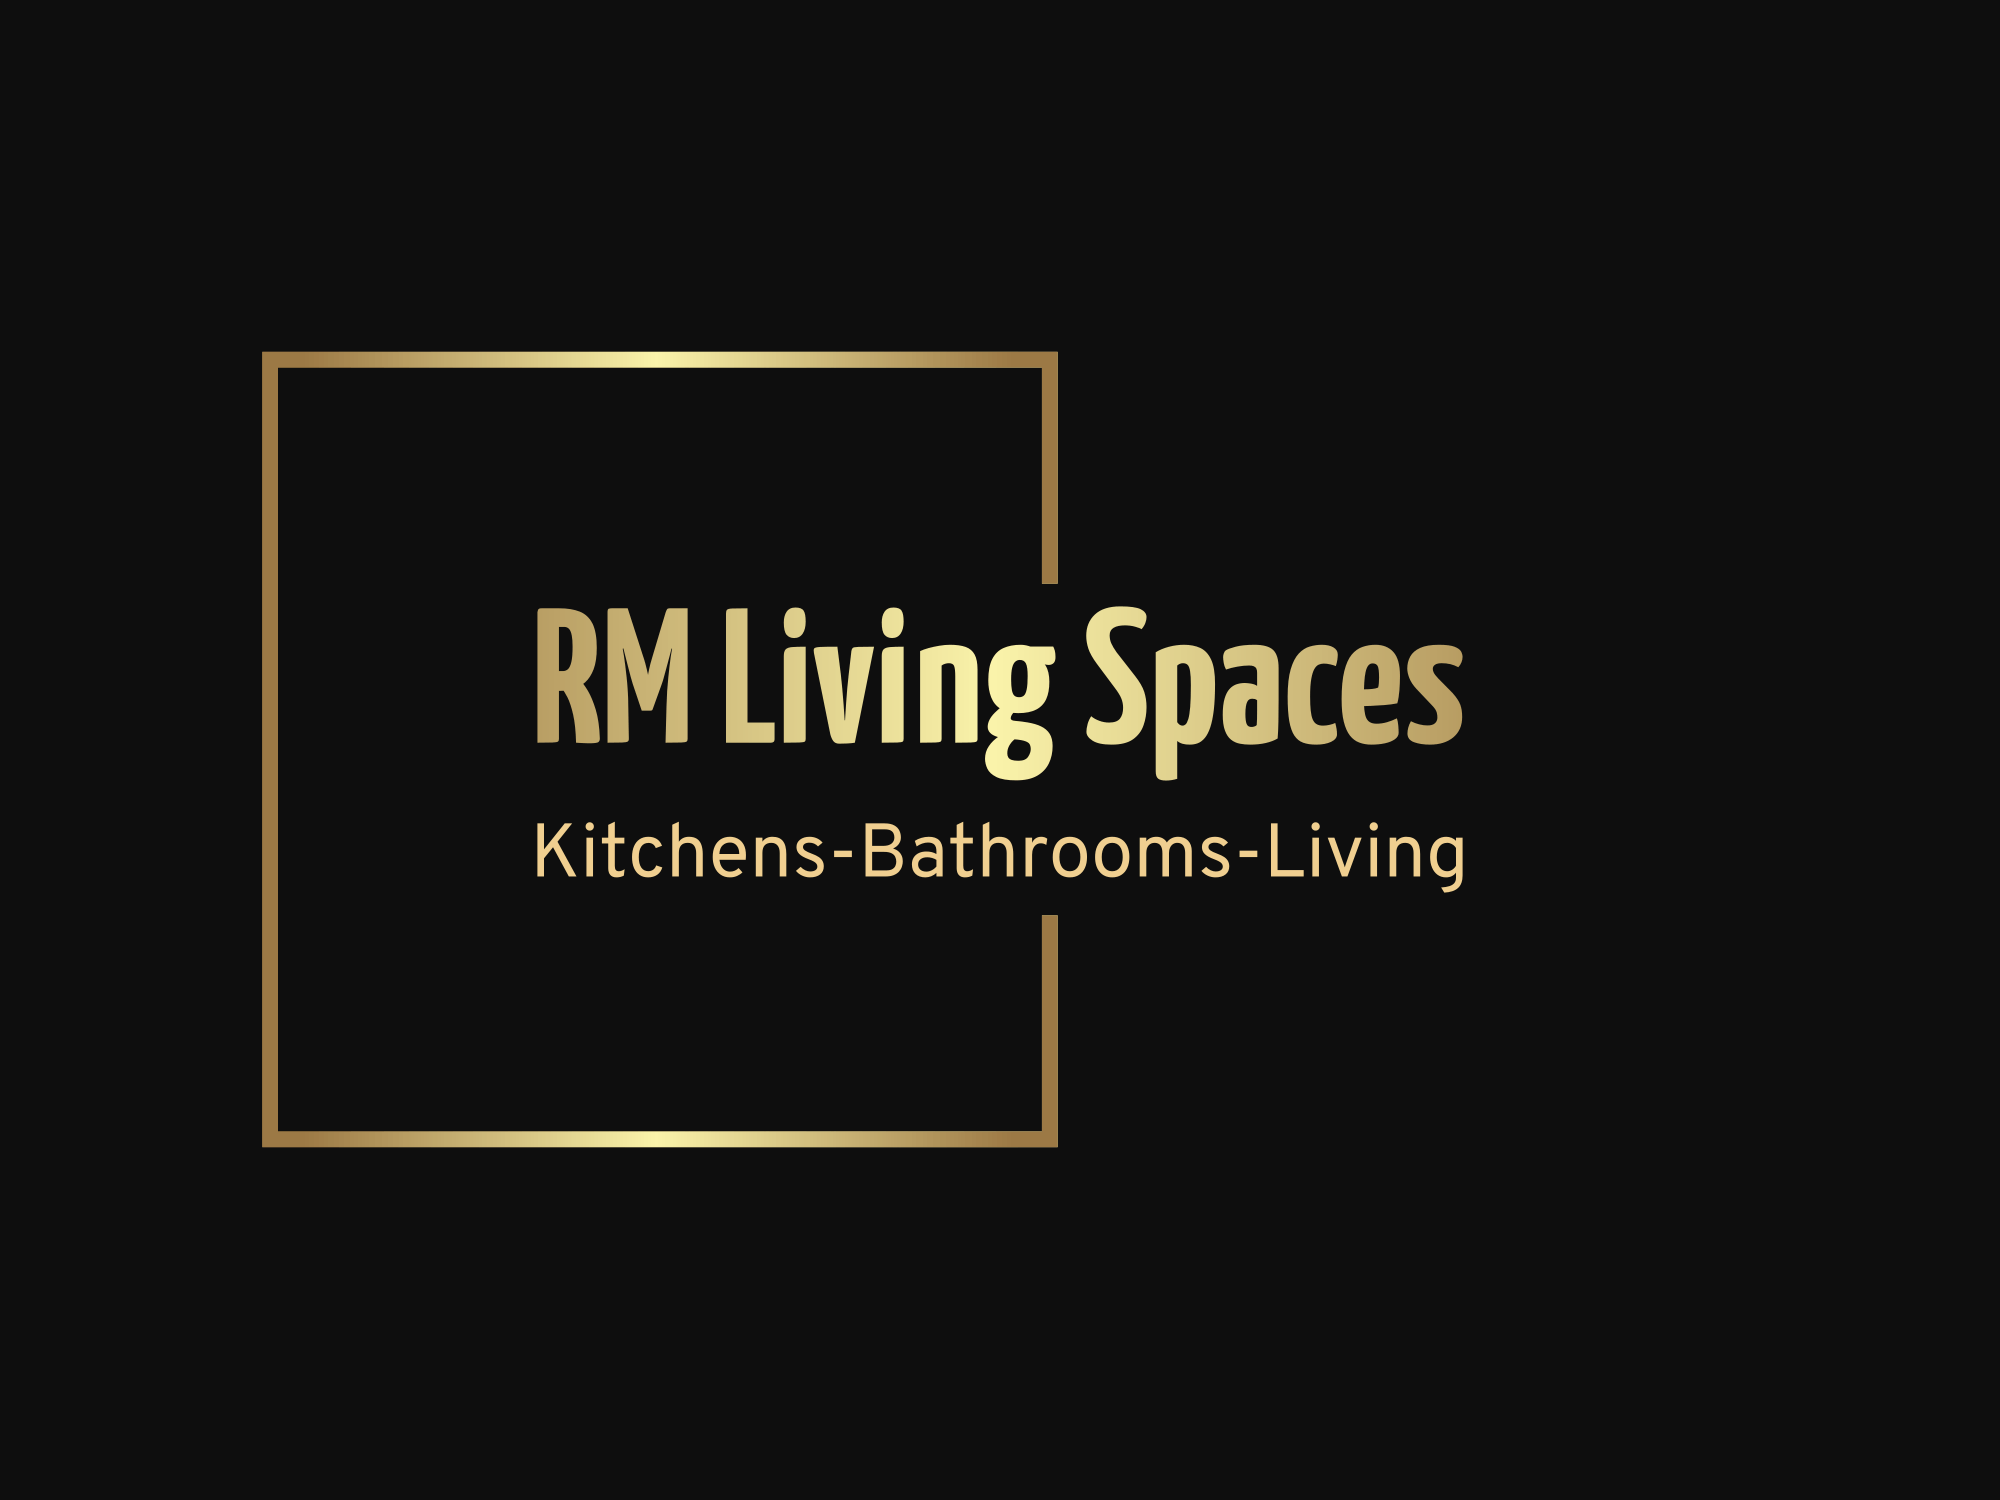 Logo of RM Living Spaces